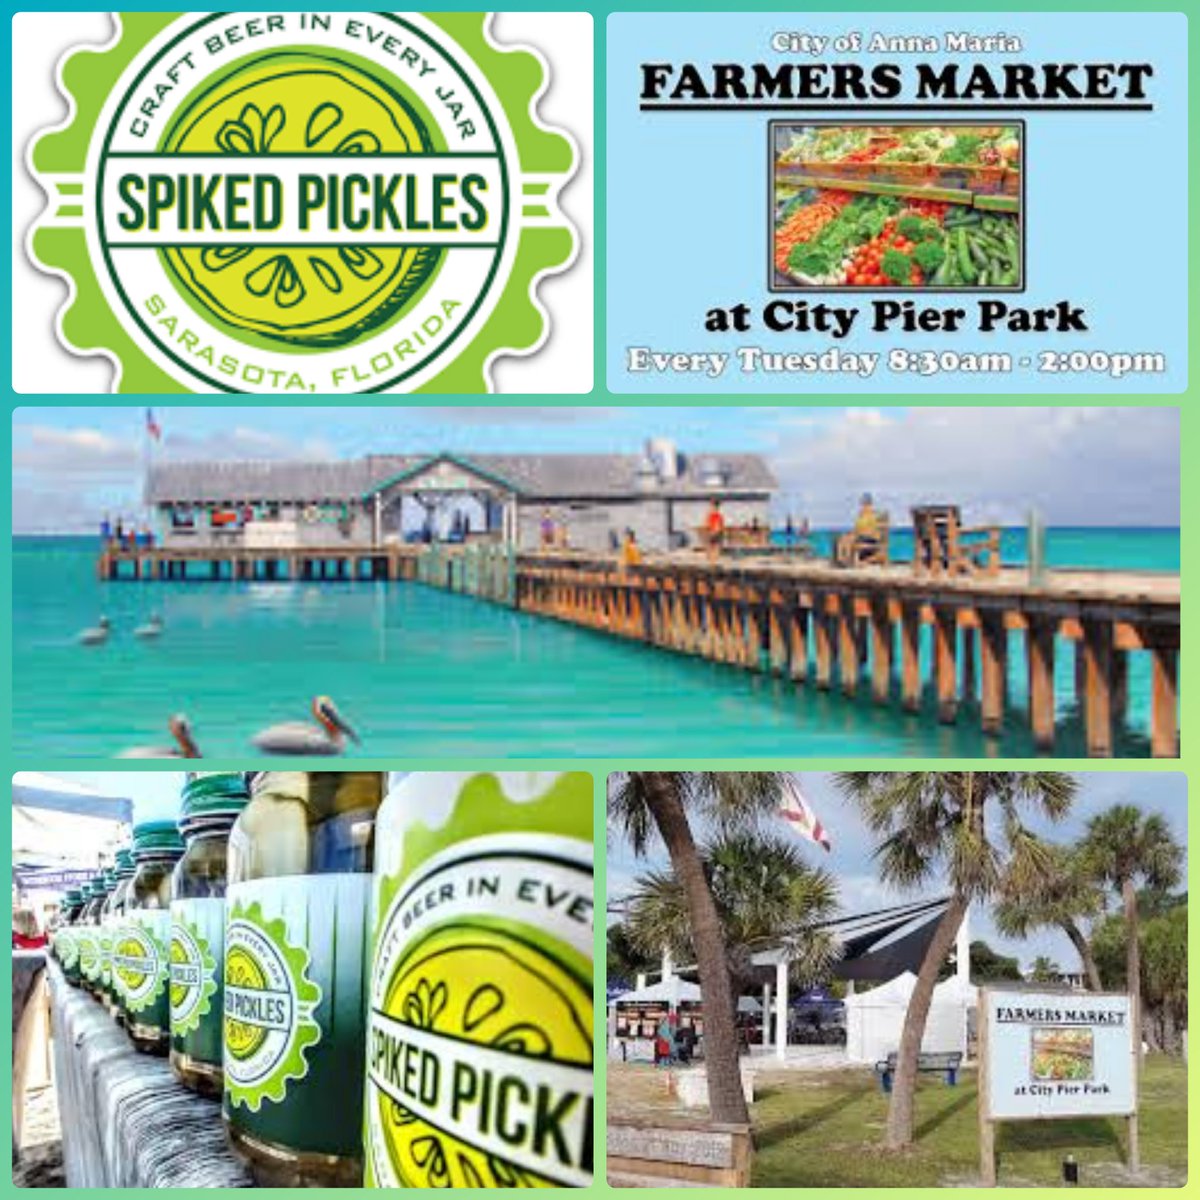 AMI today till 2pm. 
12 varieties of delicious, probiotic pickled goods. 
Be there or be 🔲. 
SpikedPickles #pickles #craftbeer #FloridaBrewersGuild #FloridaBreweries
#allnatural #noadditives #nopreservatives
#EatLocal #BuyLocal #ChefLife #Chef #Specialityfoods  #FarmersMarkets